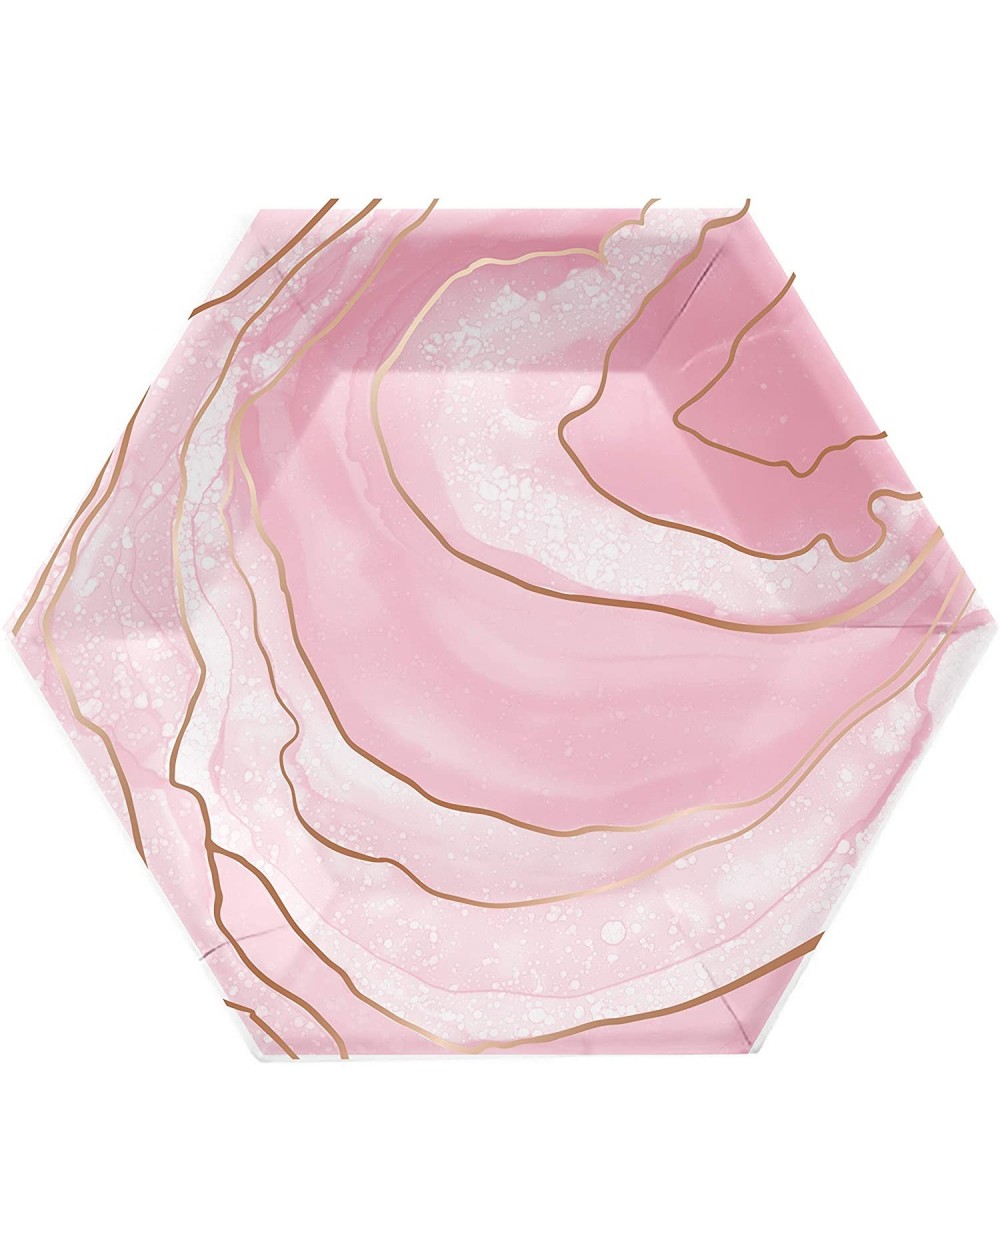 Tableware Rosé All Day Geode Paper Plates- 24 ct - CL18R9YL37T $14.20